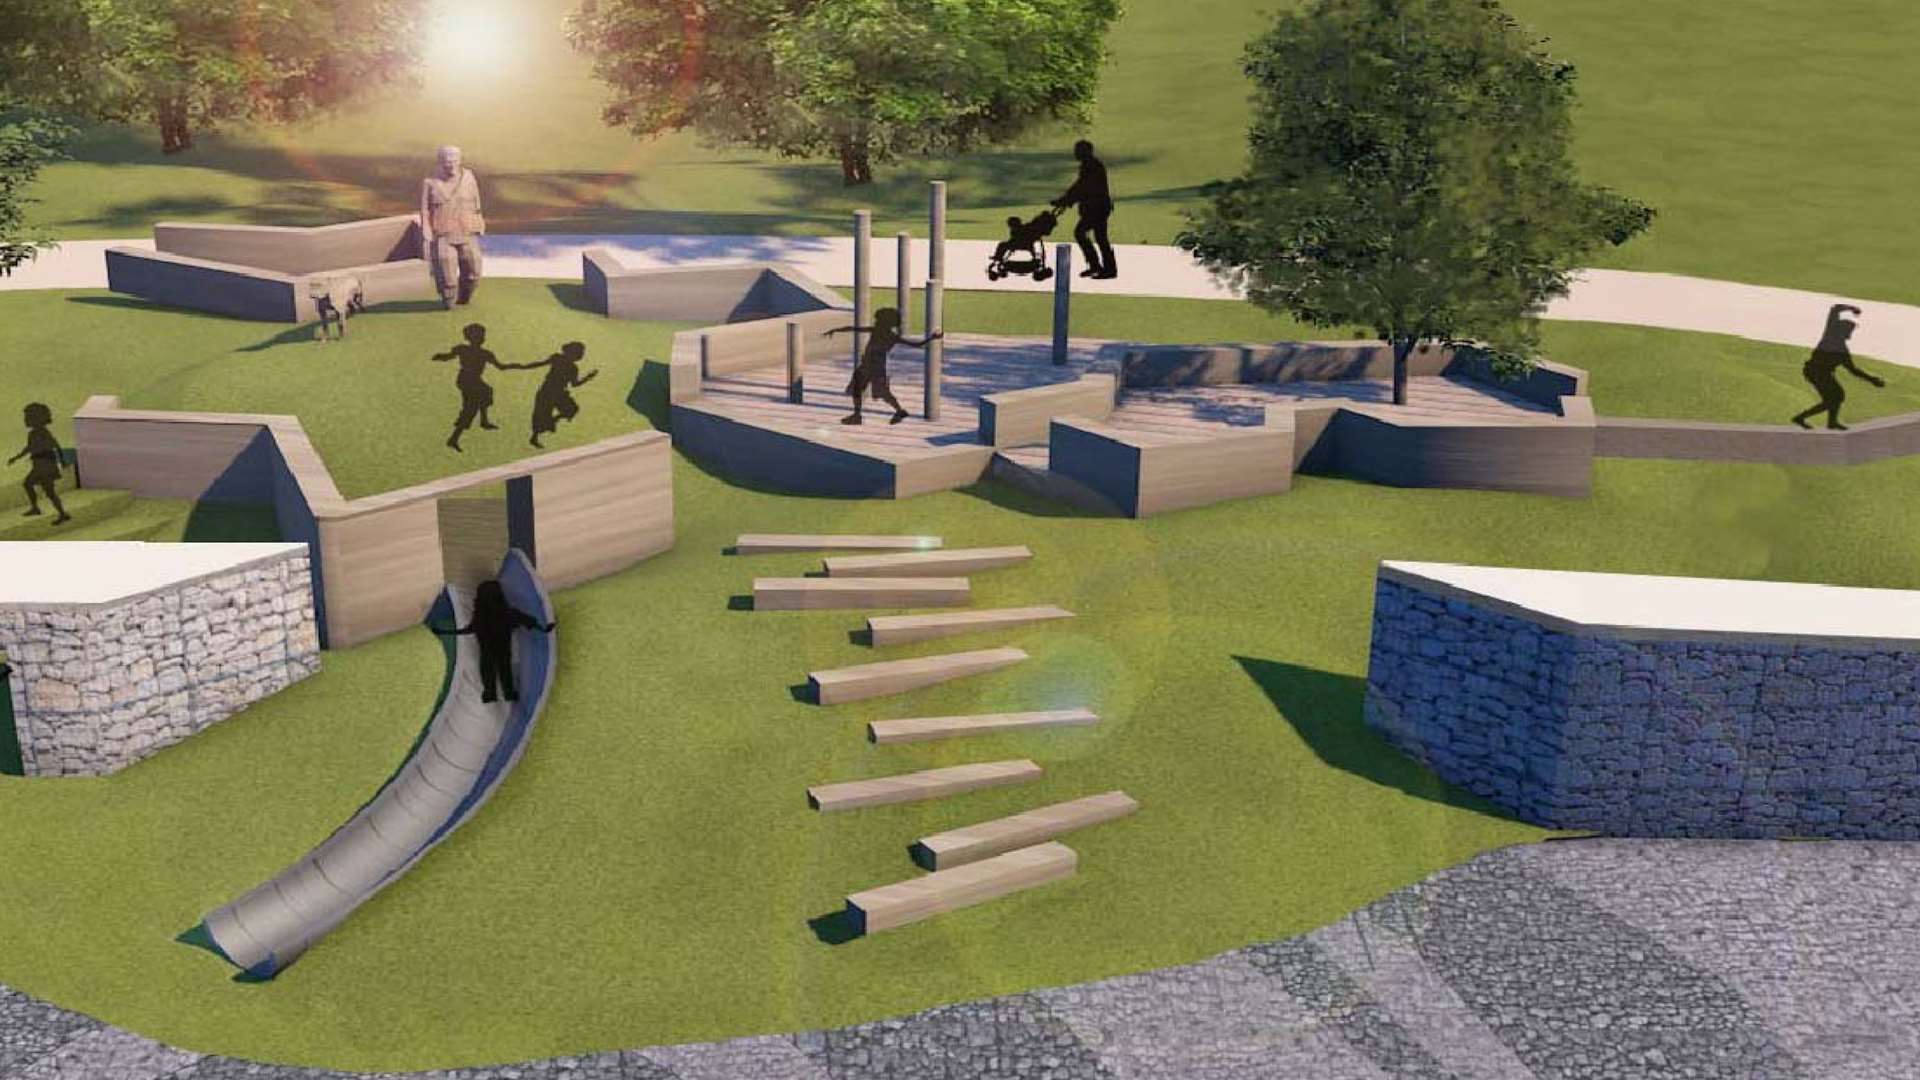 Plans include a play area. Picture: Medway Council